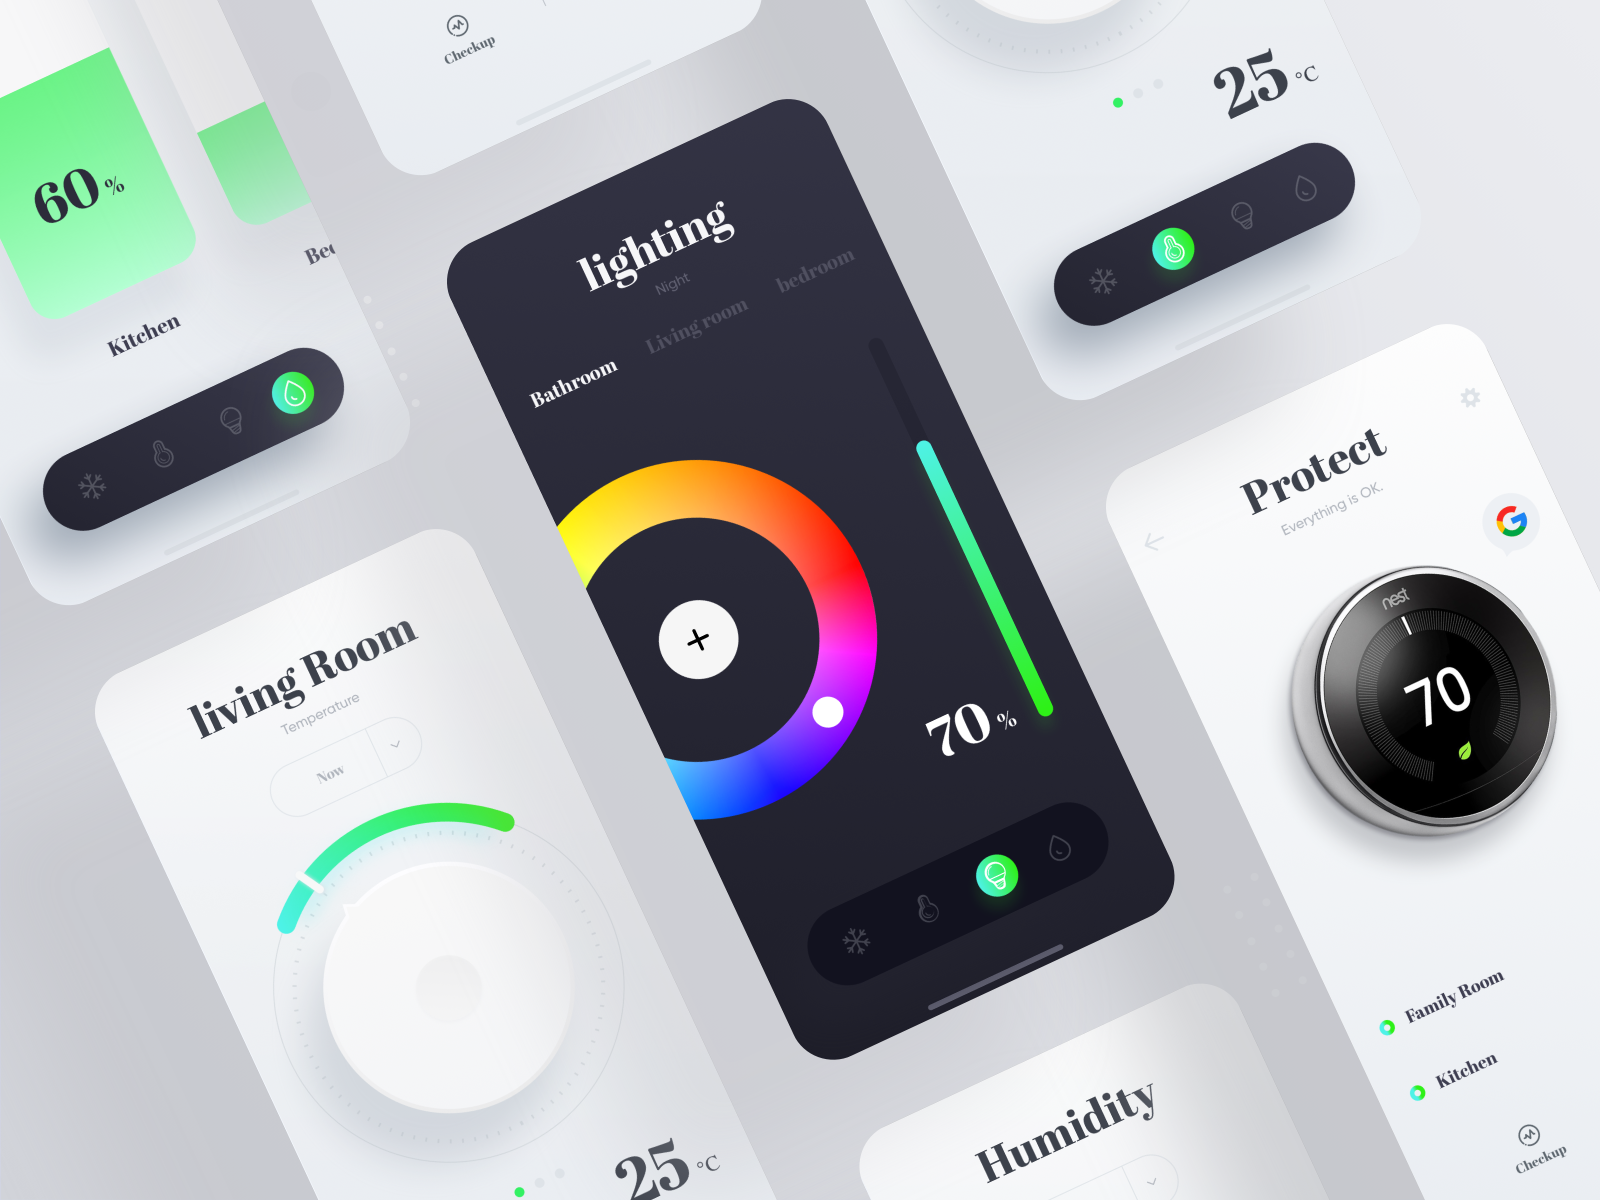 Google Smart Home System by ZhaoWei on Dribbble